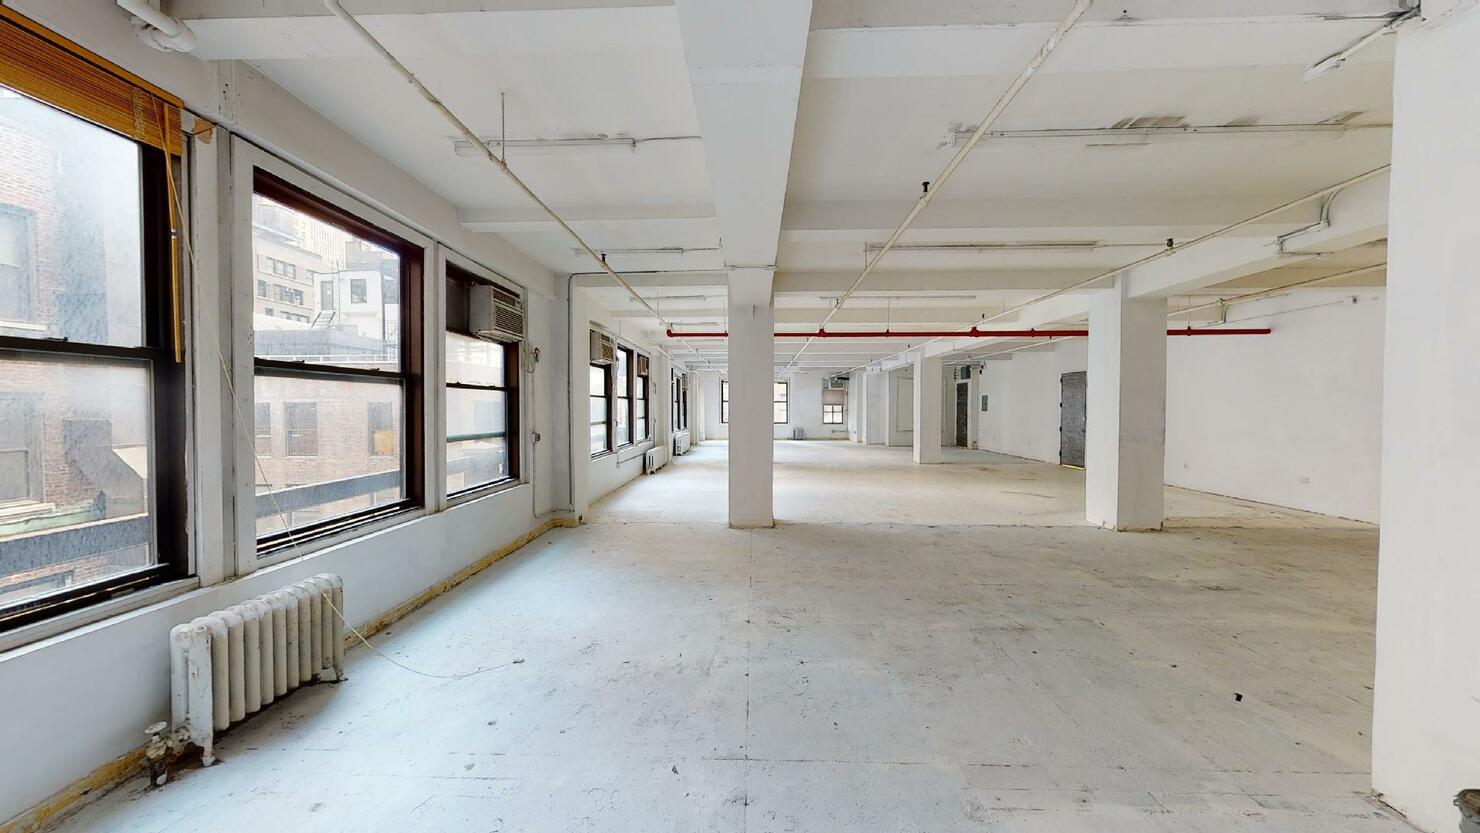 3,600 sq. ft of customizable loft-style office space for lease at 255 West 36th Street, NYC.